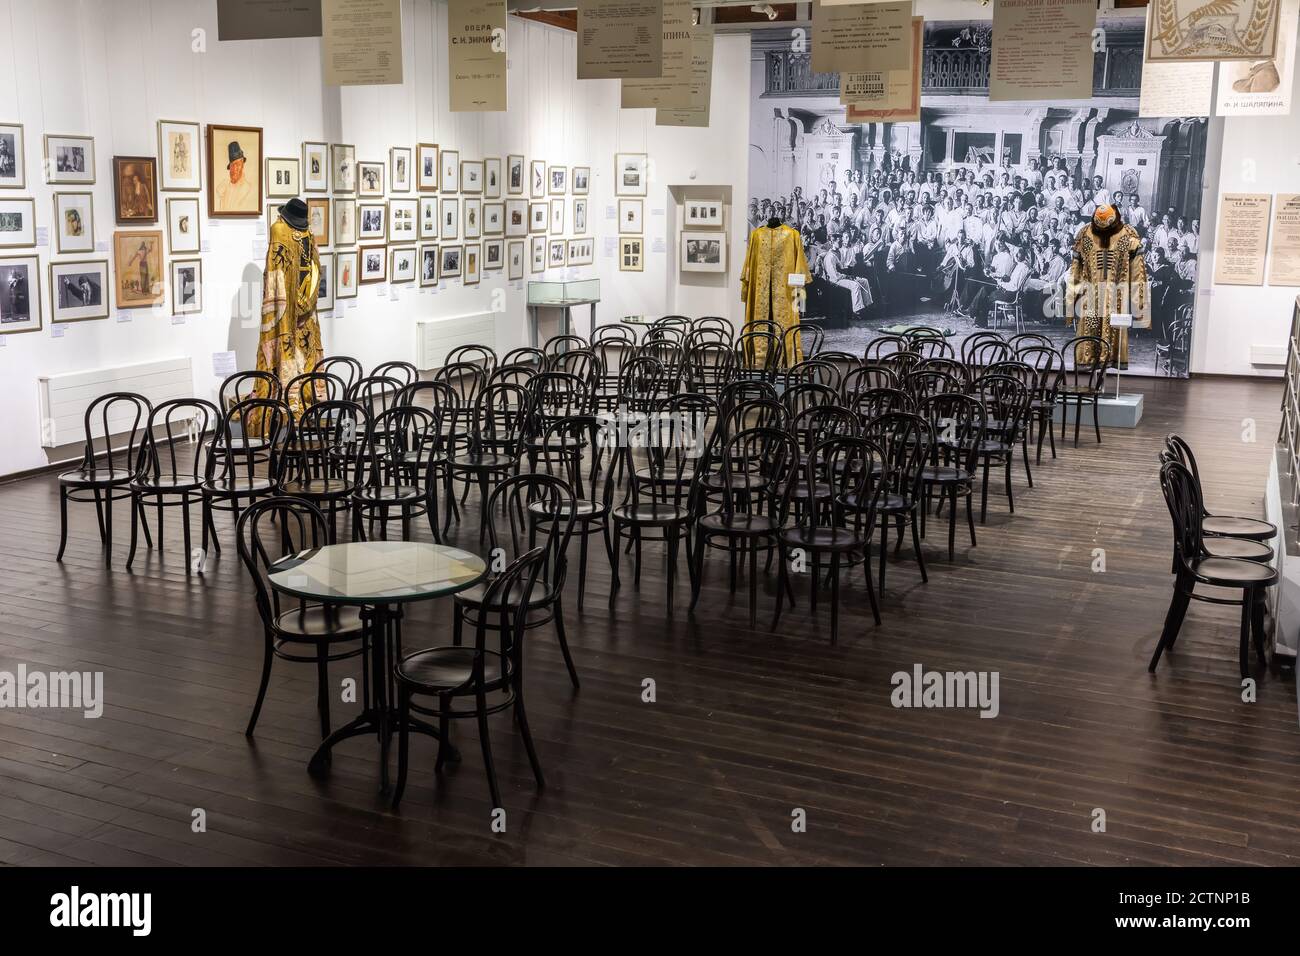 Moscow, Russia – July 8, 2017. Interior view of Bakhrushin Theatre Museum in Moscow. View with chairs and exhibits. Stock Photo